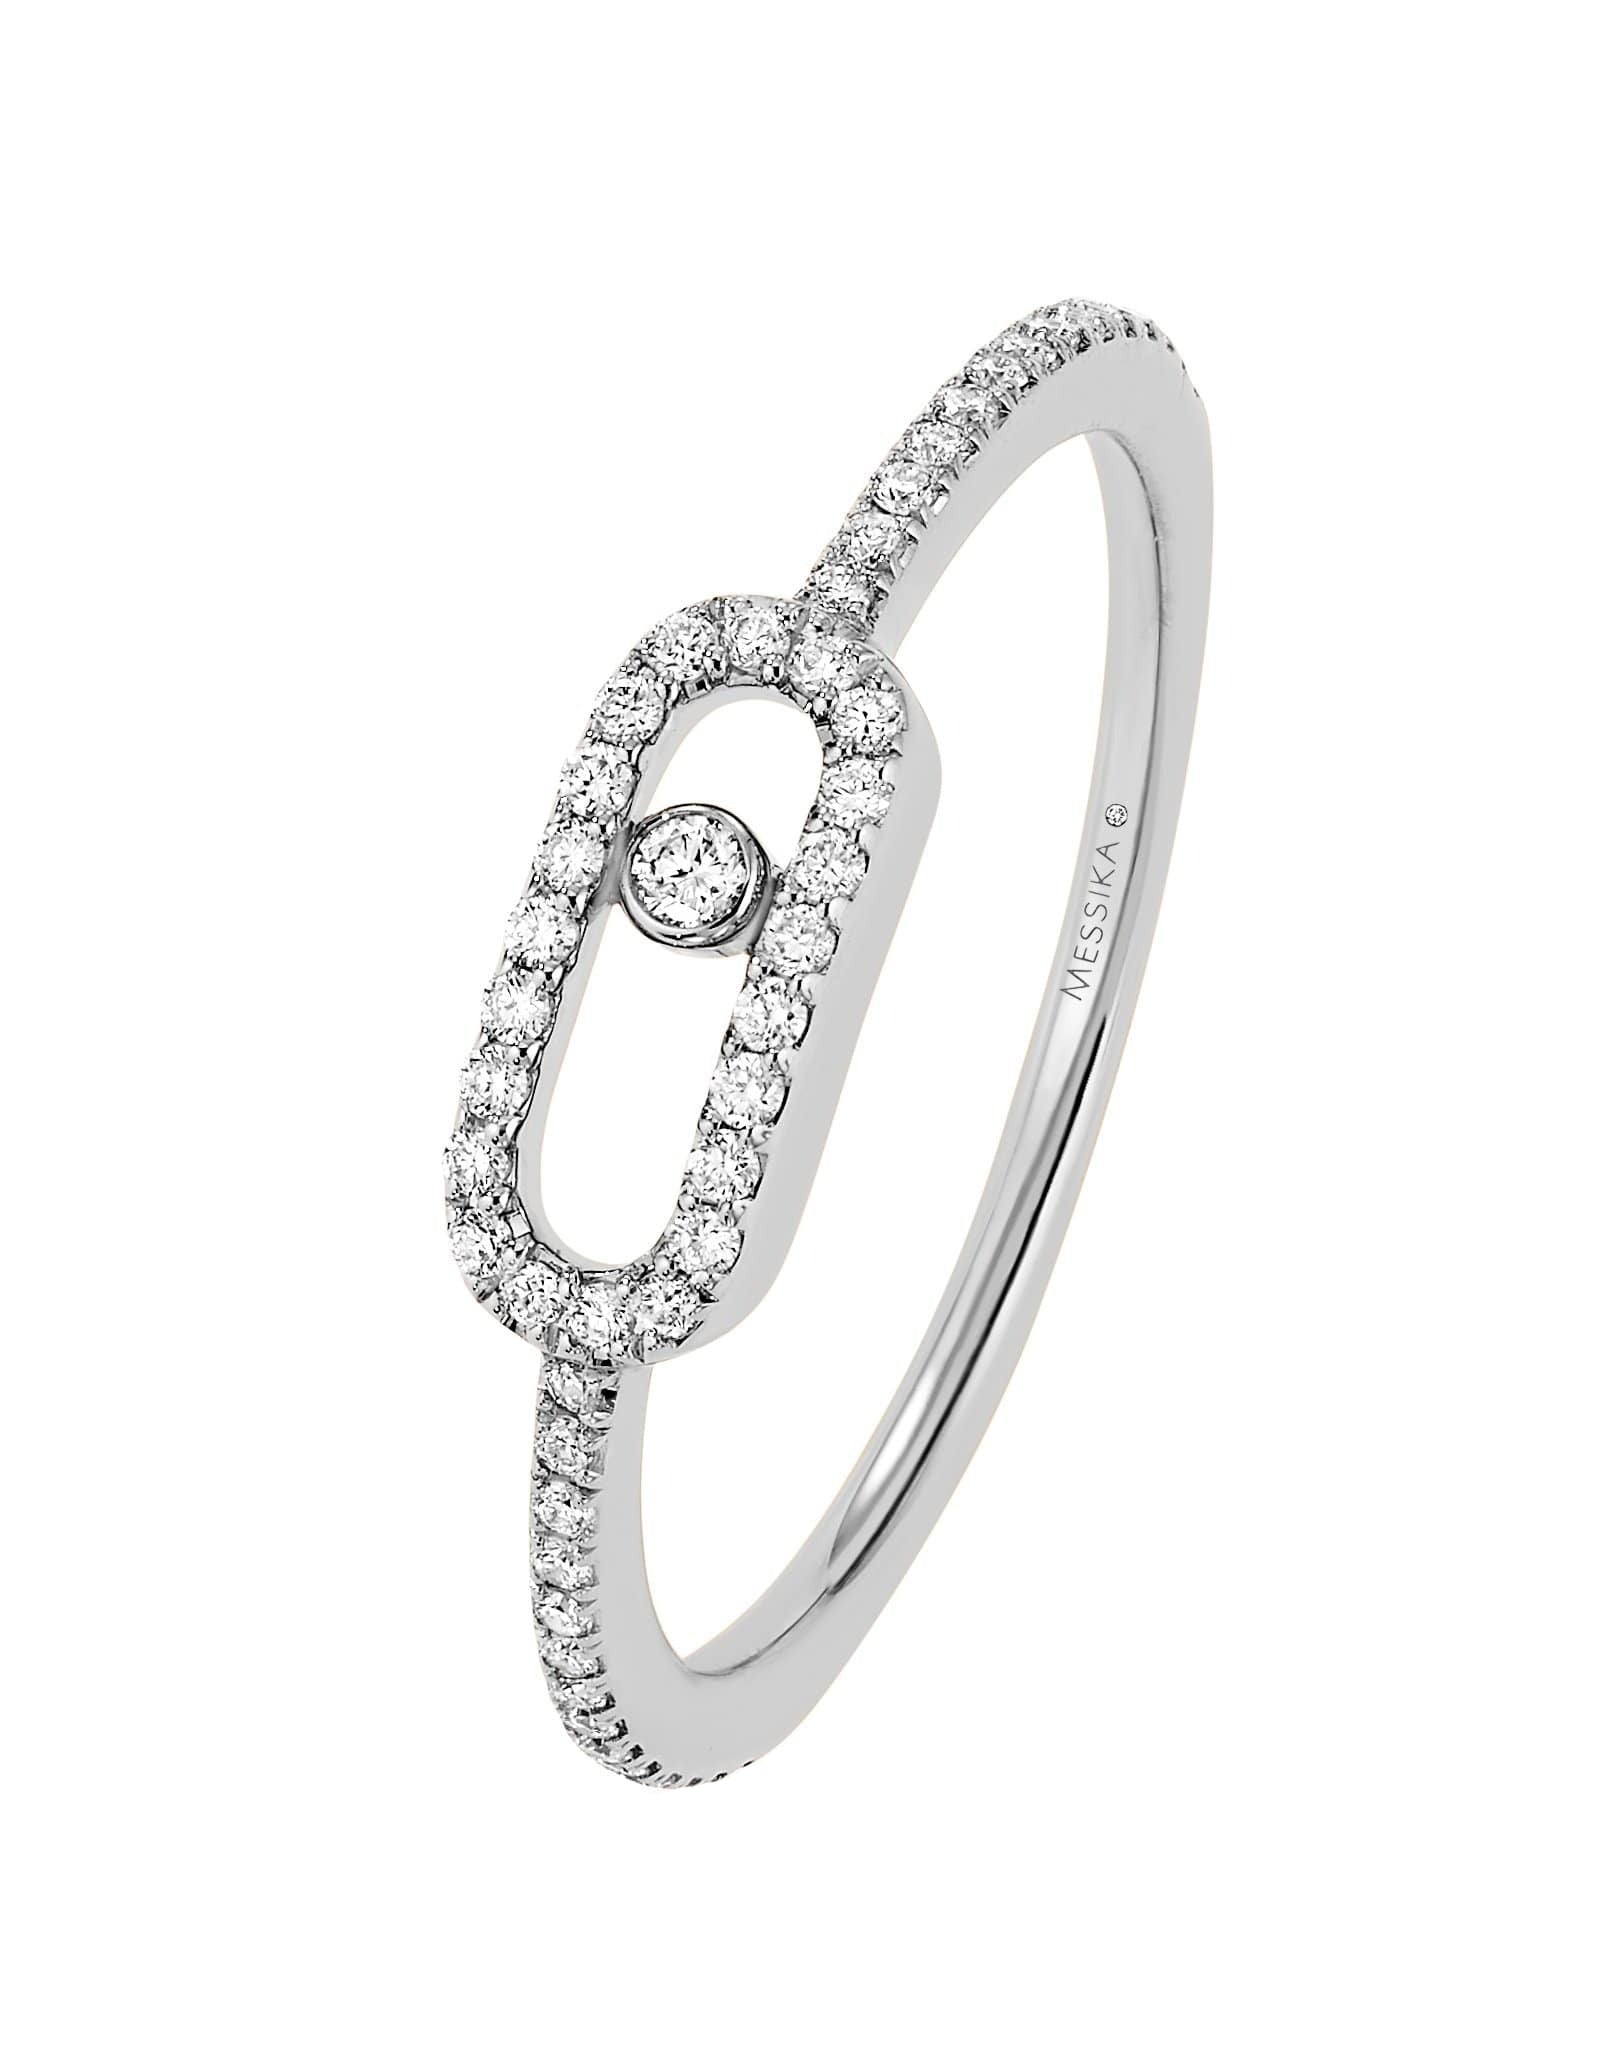 MESSIKA-Move Uno Pave Ring-WHITE GOLD